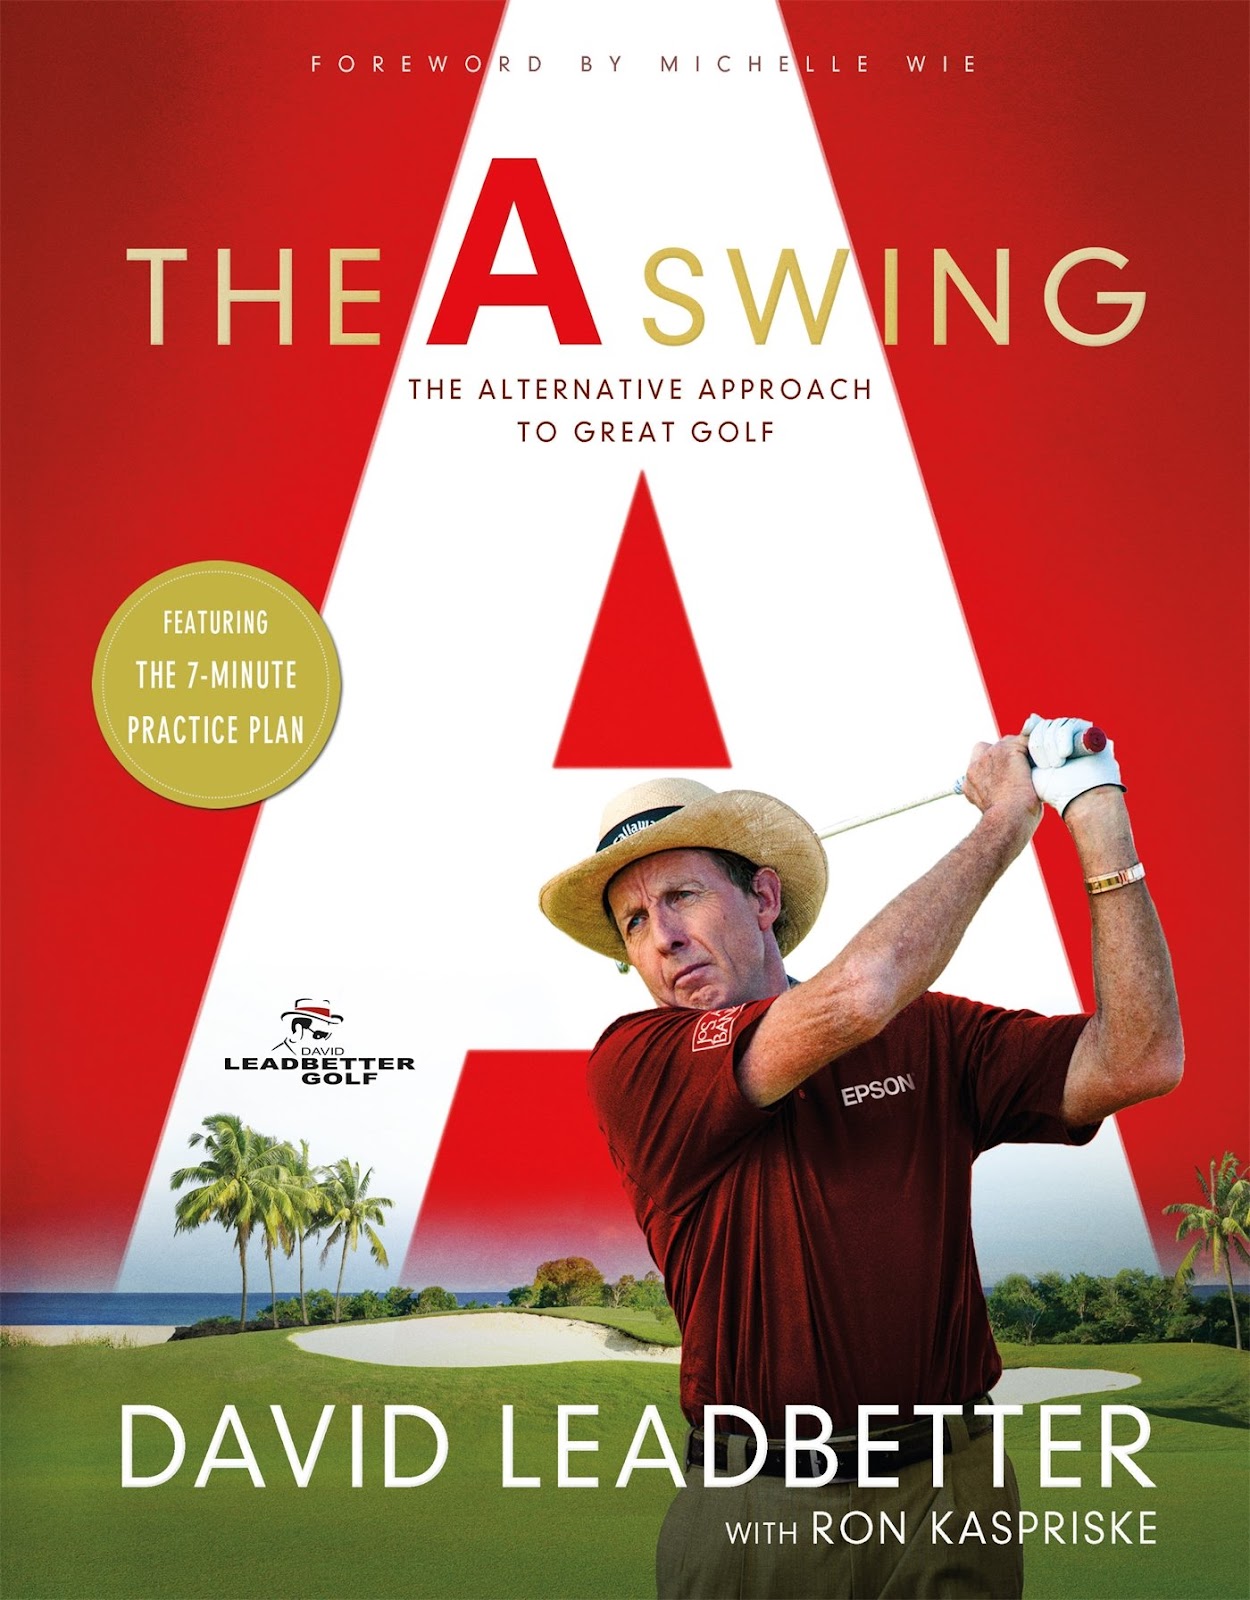 Download Ebook - The A Swing: The Alternative Approach to Great Golf